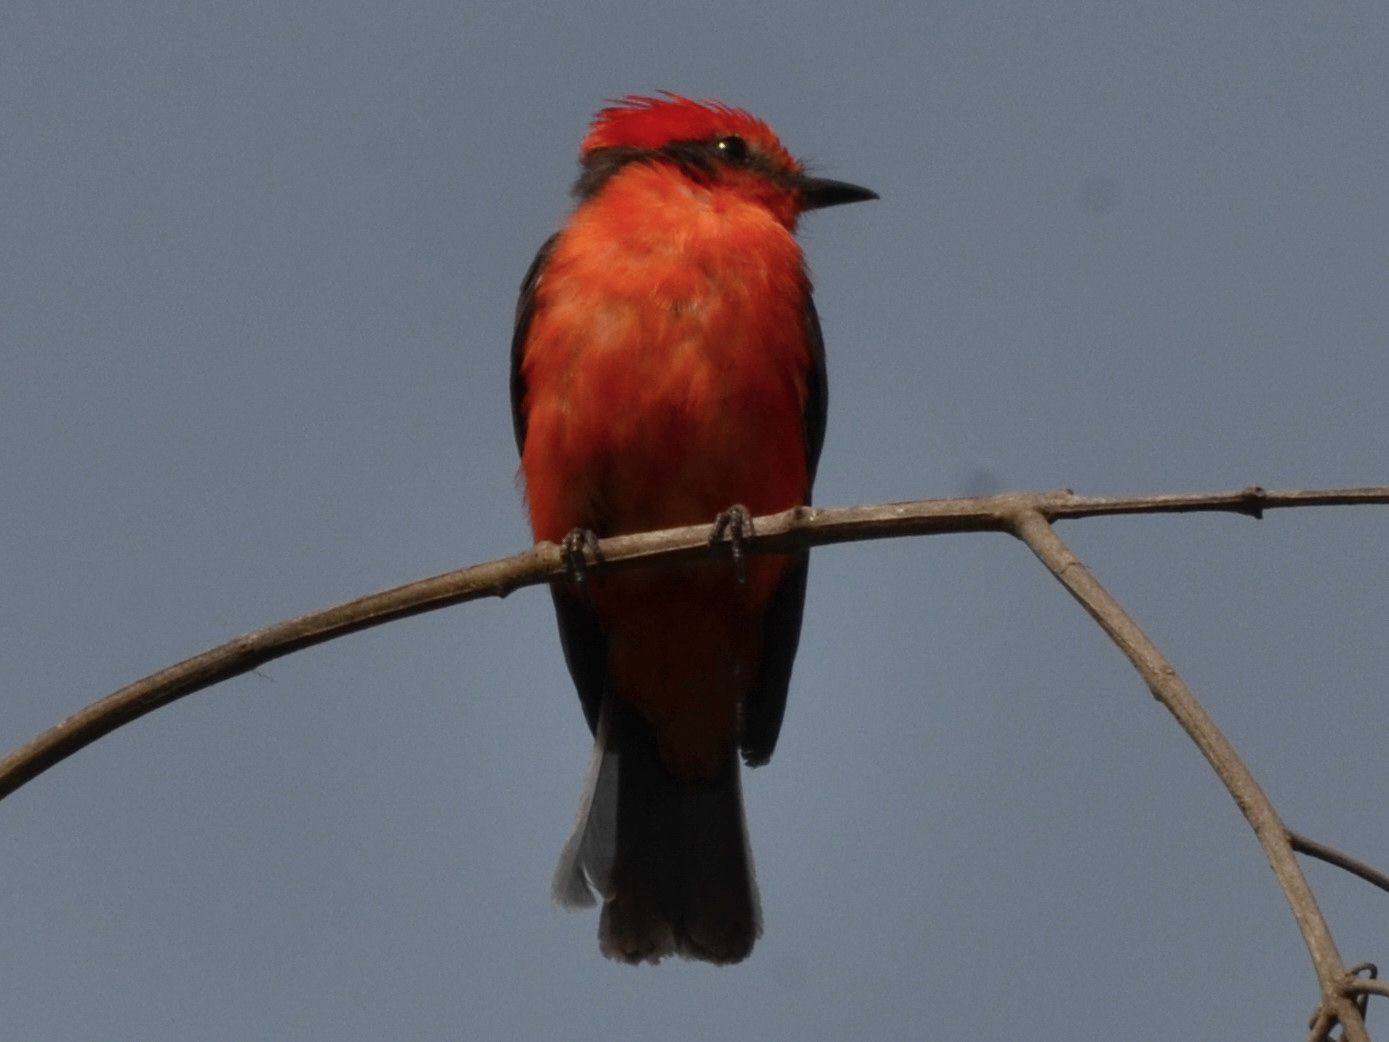 Click picture to see more Vermilion Flycatchers.